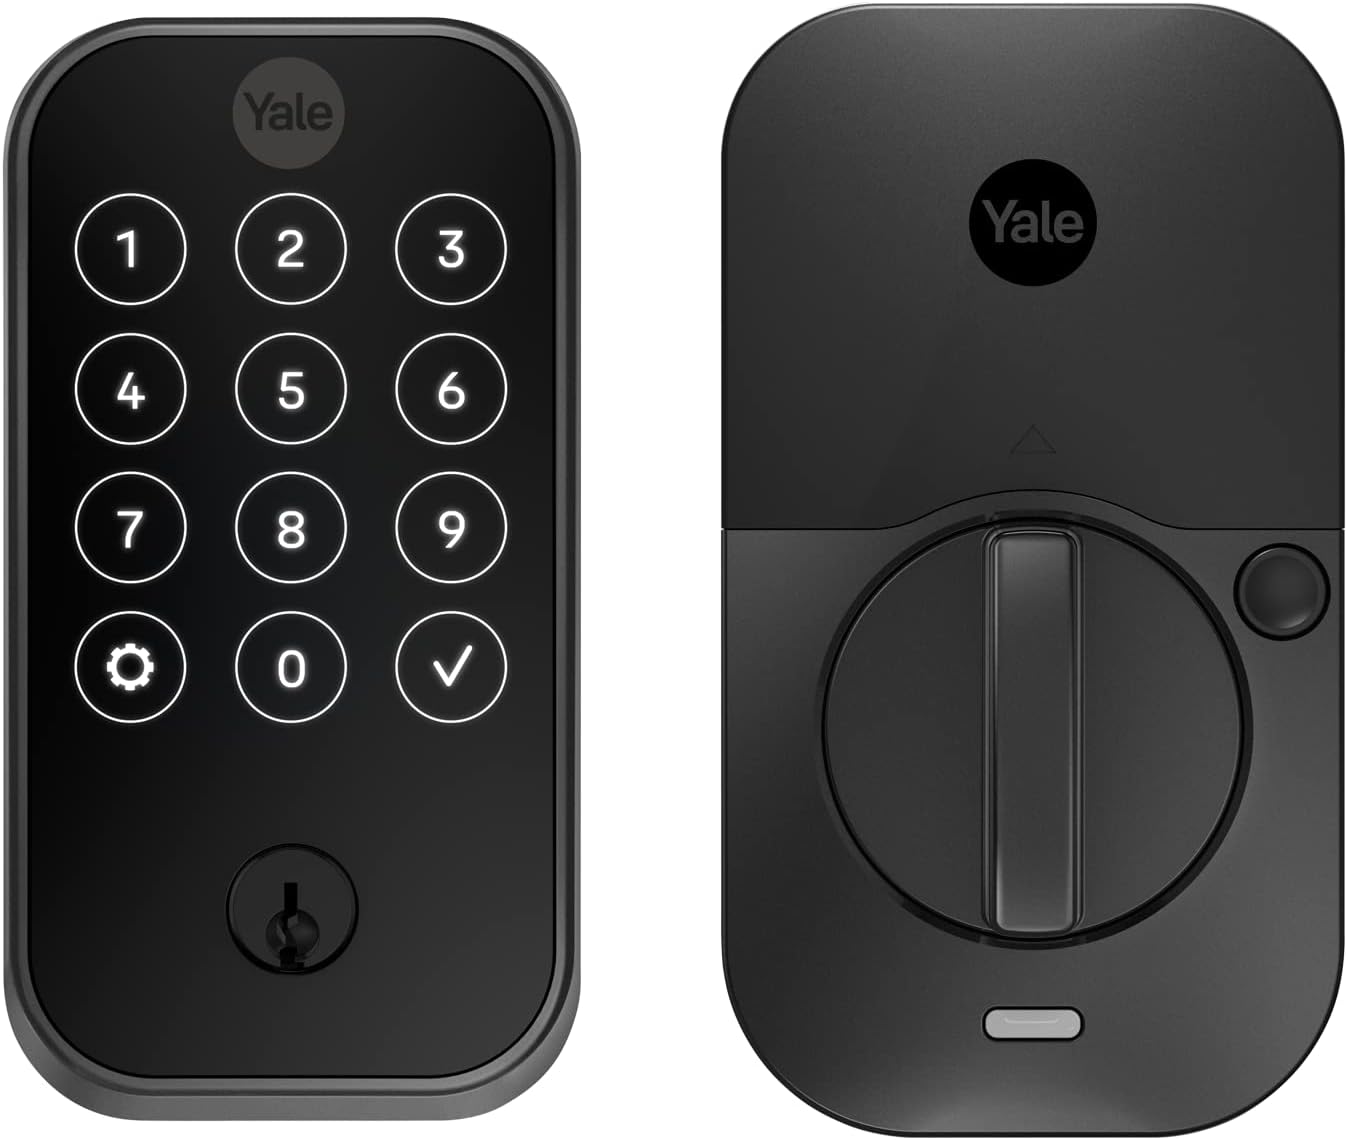 Yale Assure Lock 2 (New) Review